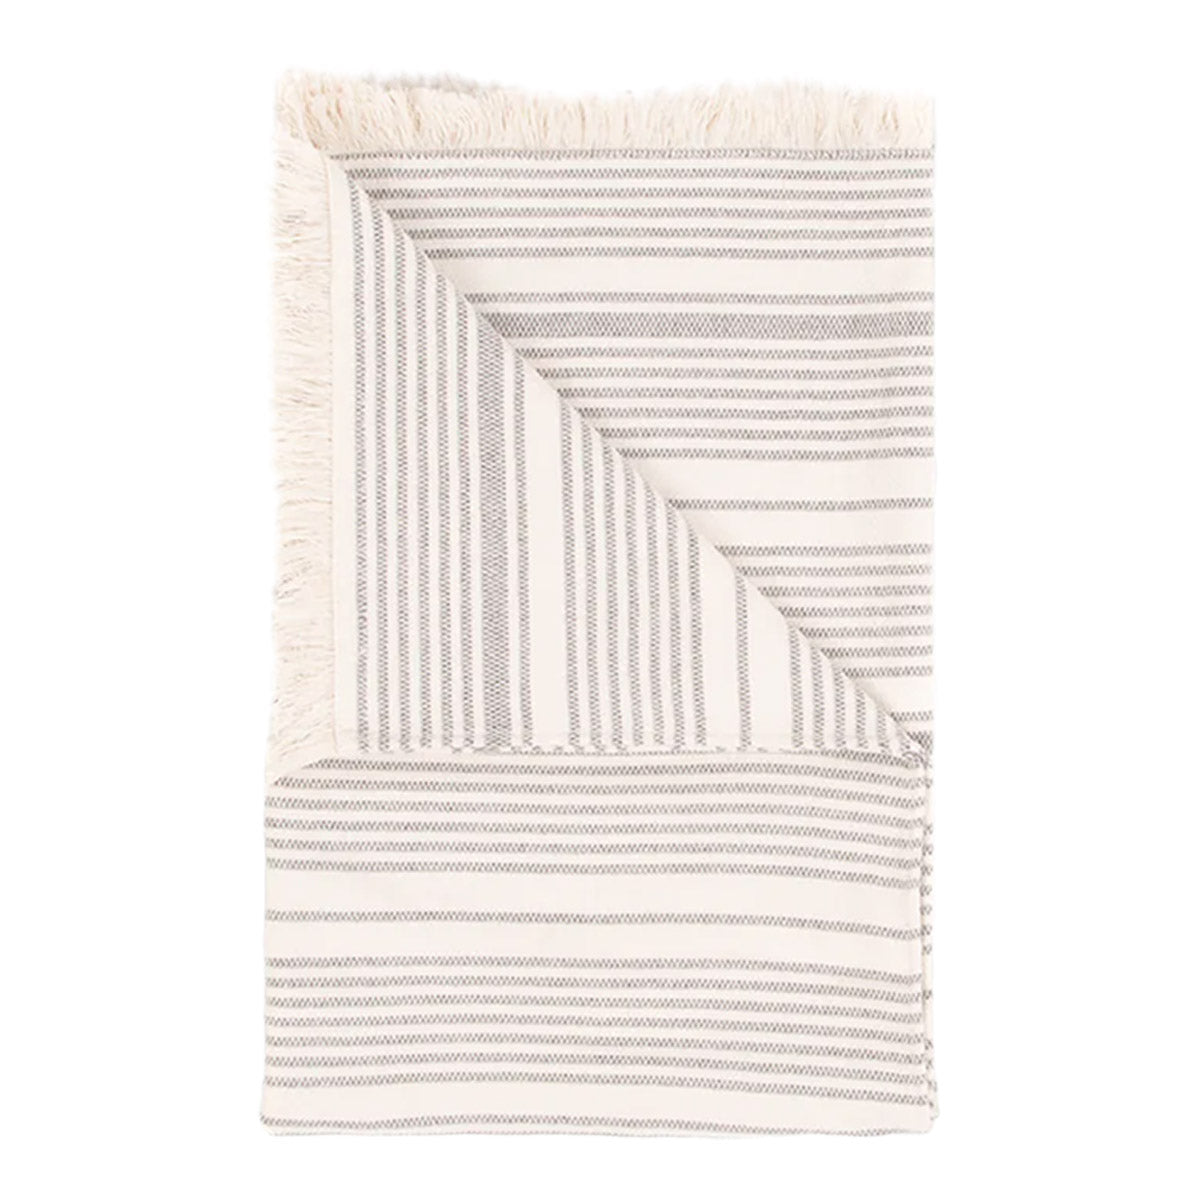 Layday Flat Weave Travel Towels